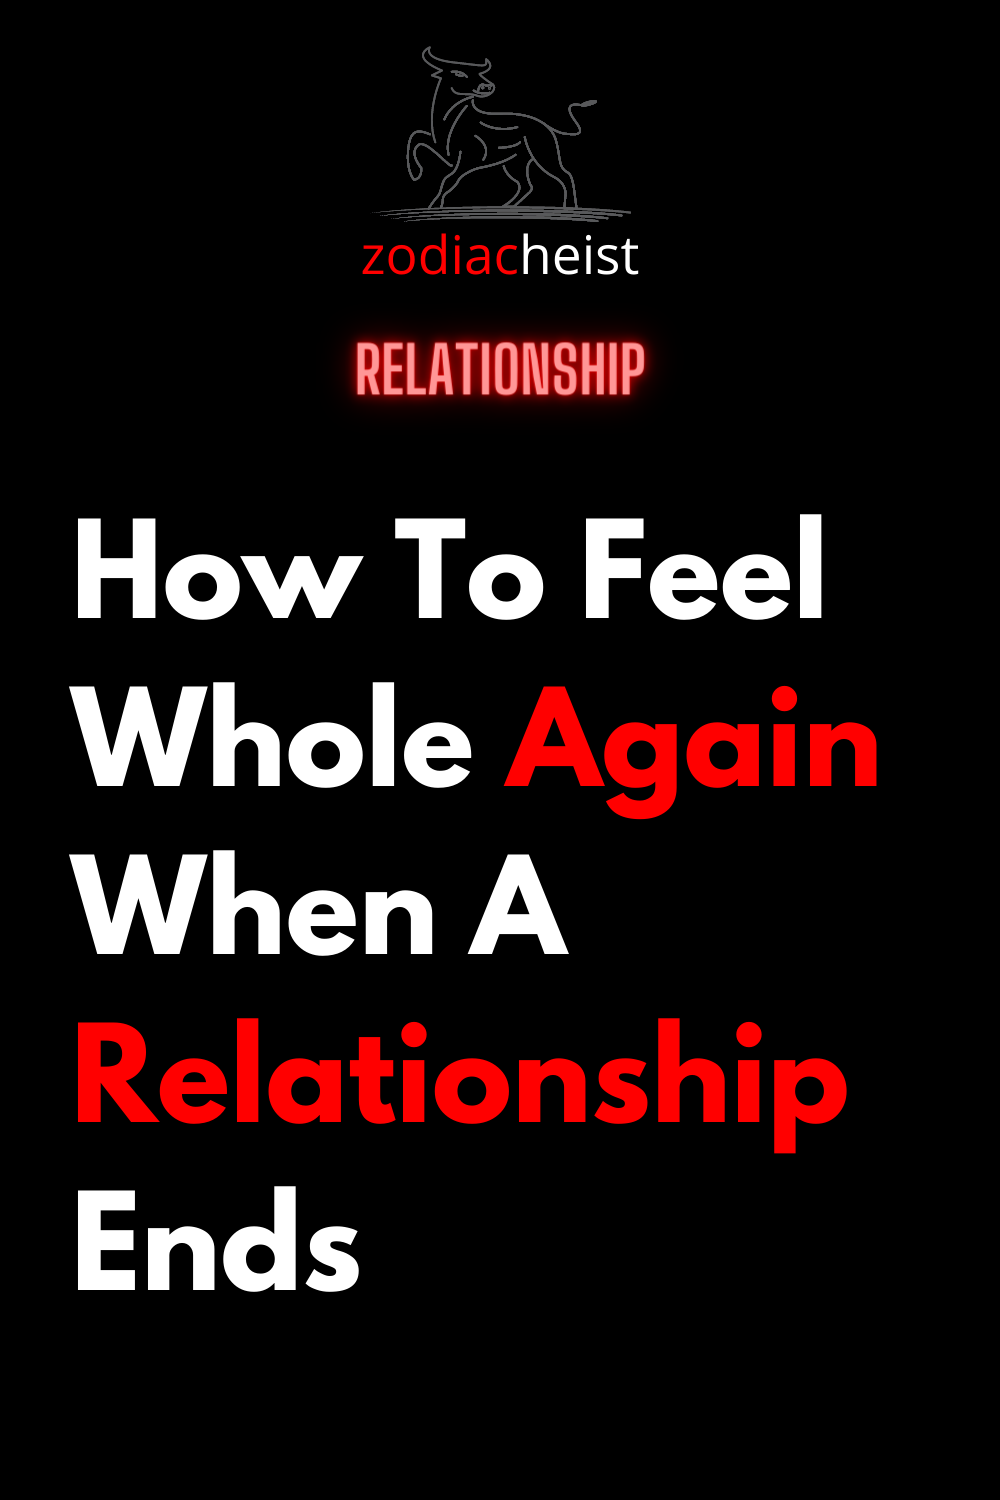 How To Feel Whole Again When A Relationship Ends